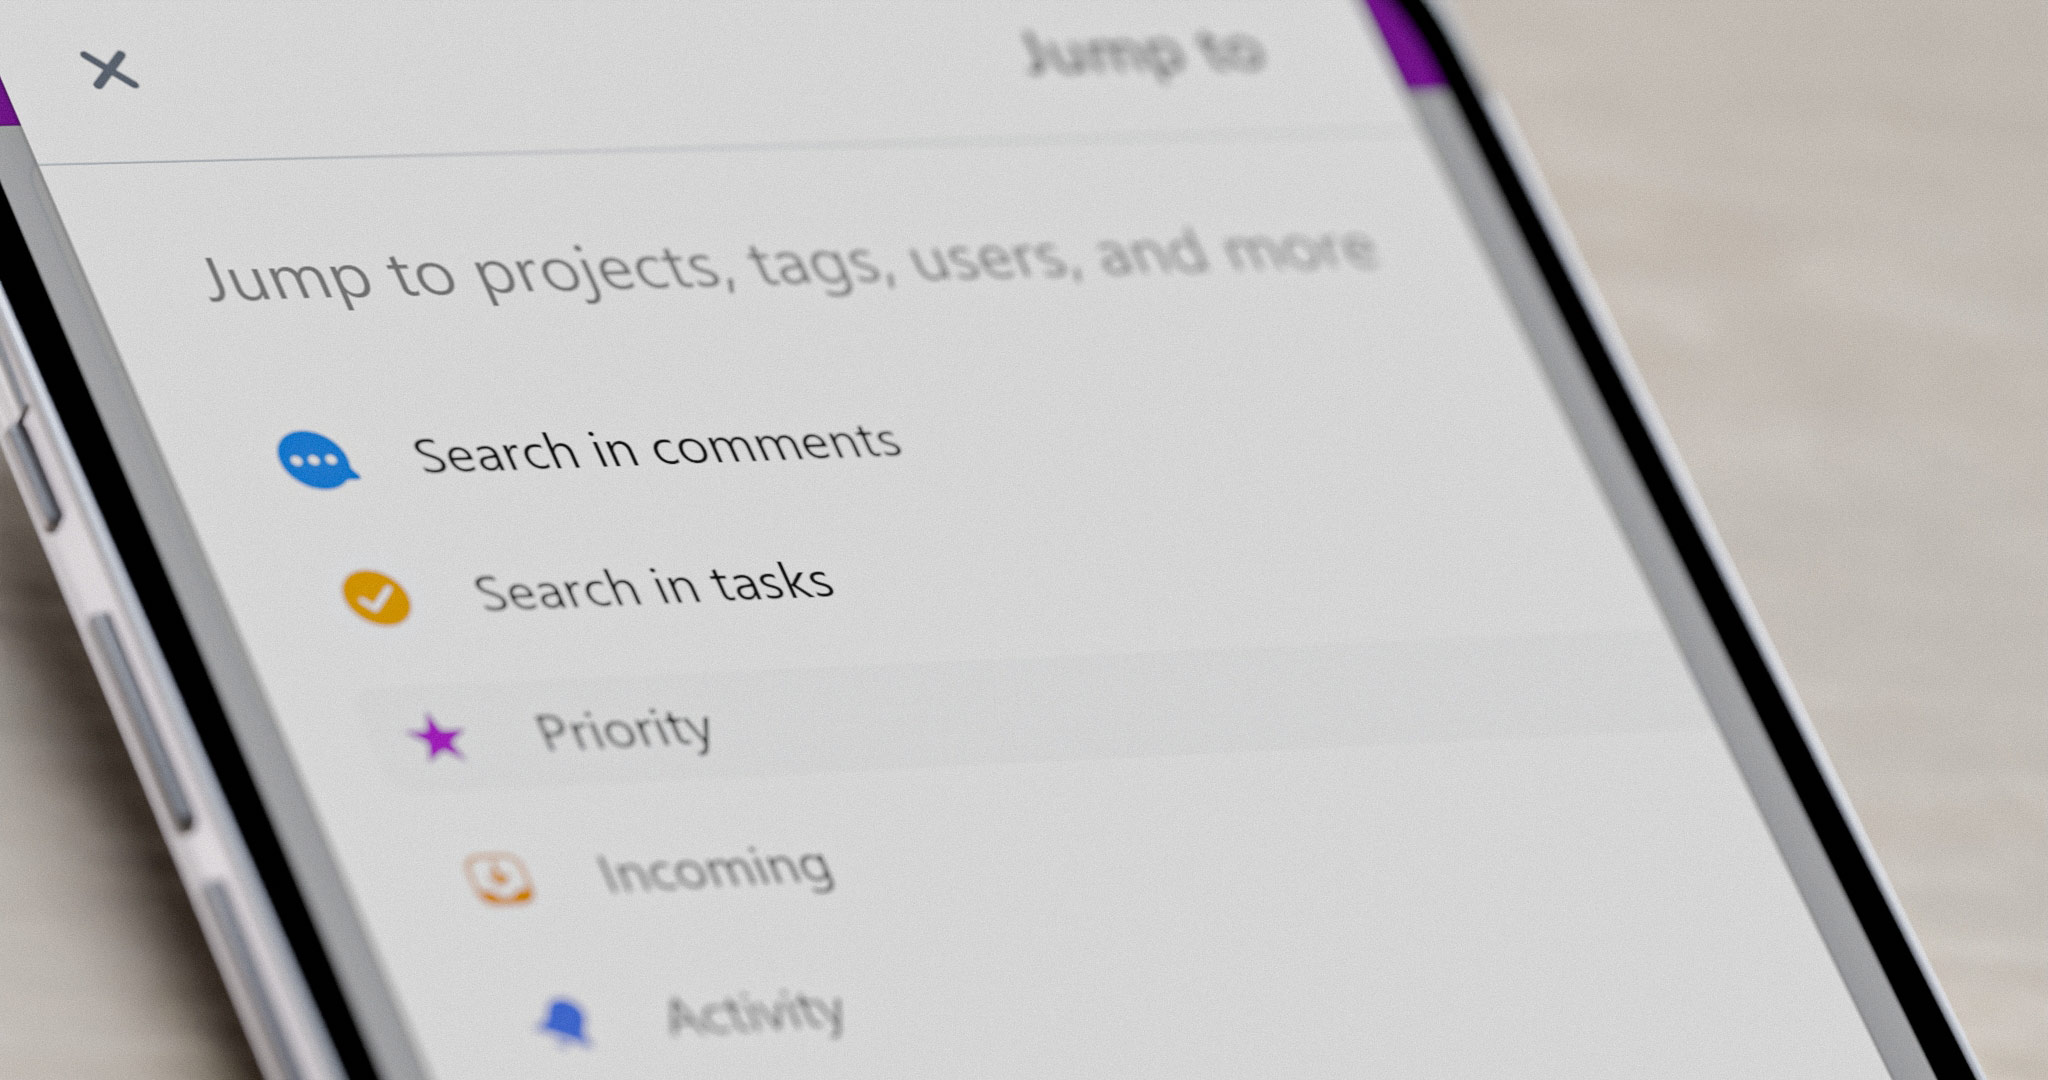 How to Search for Tasks, Projects and Single Words in Nozbe